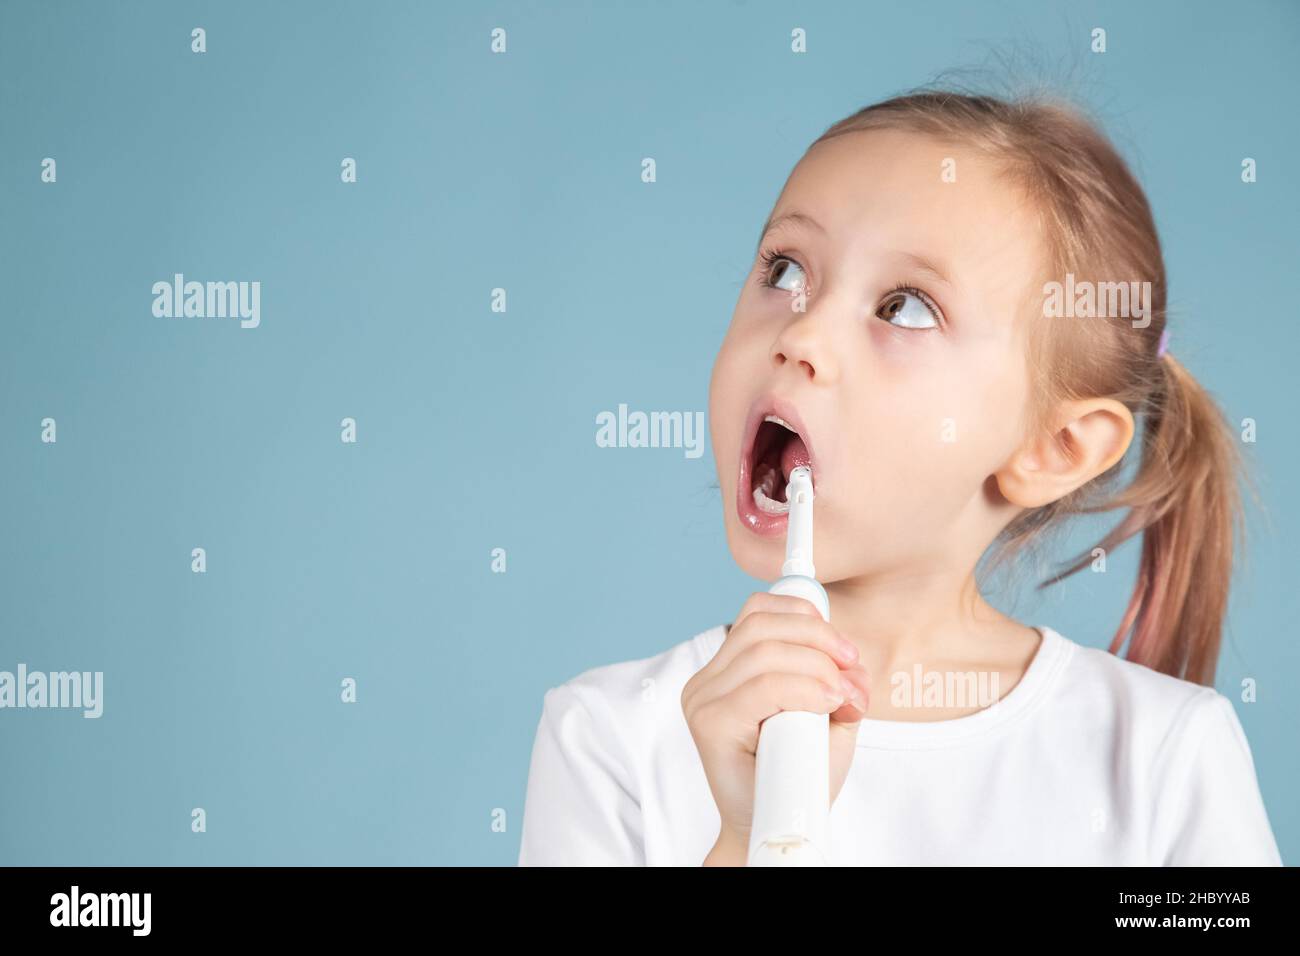 Adorable little caucasian child brushing teeth Standing Over blue Background Stock Photo